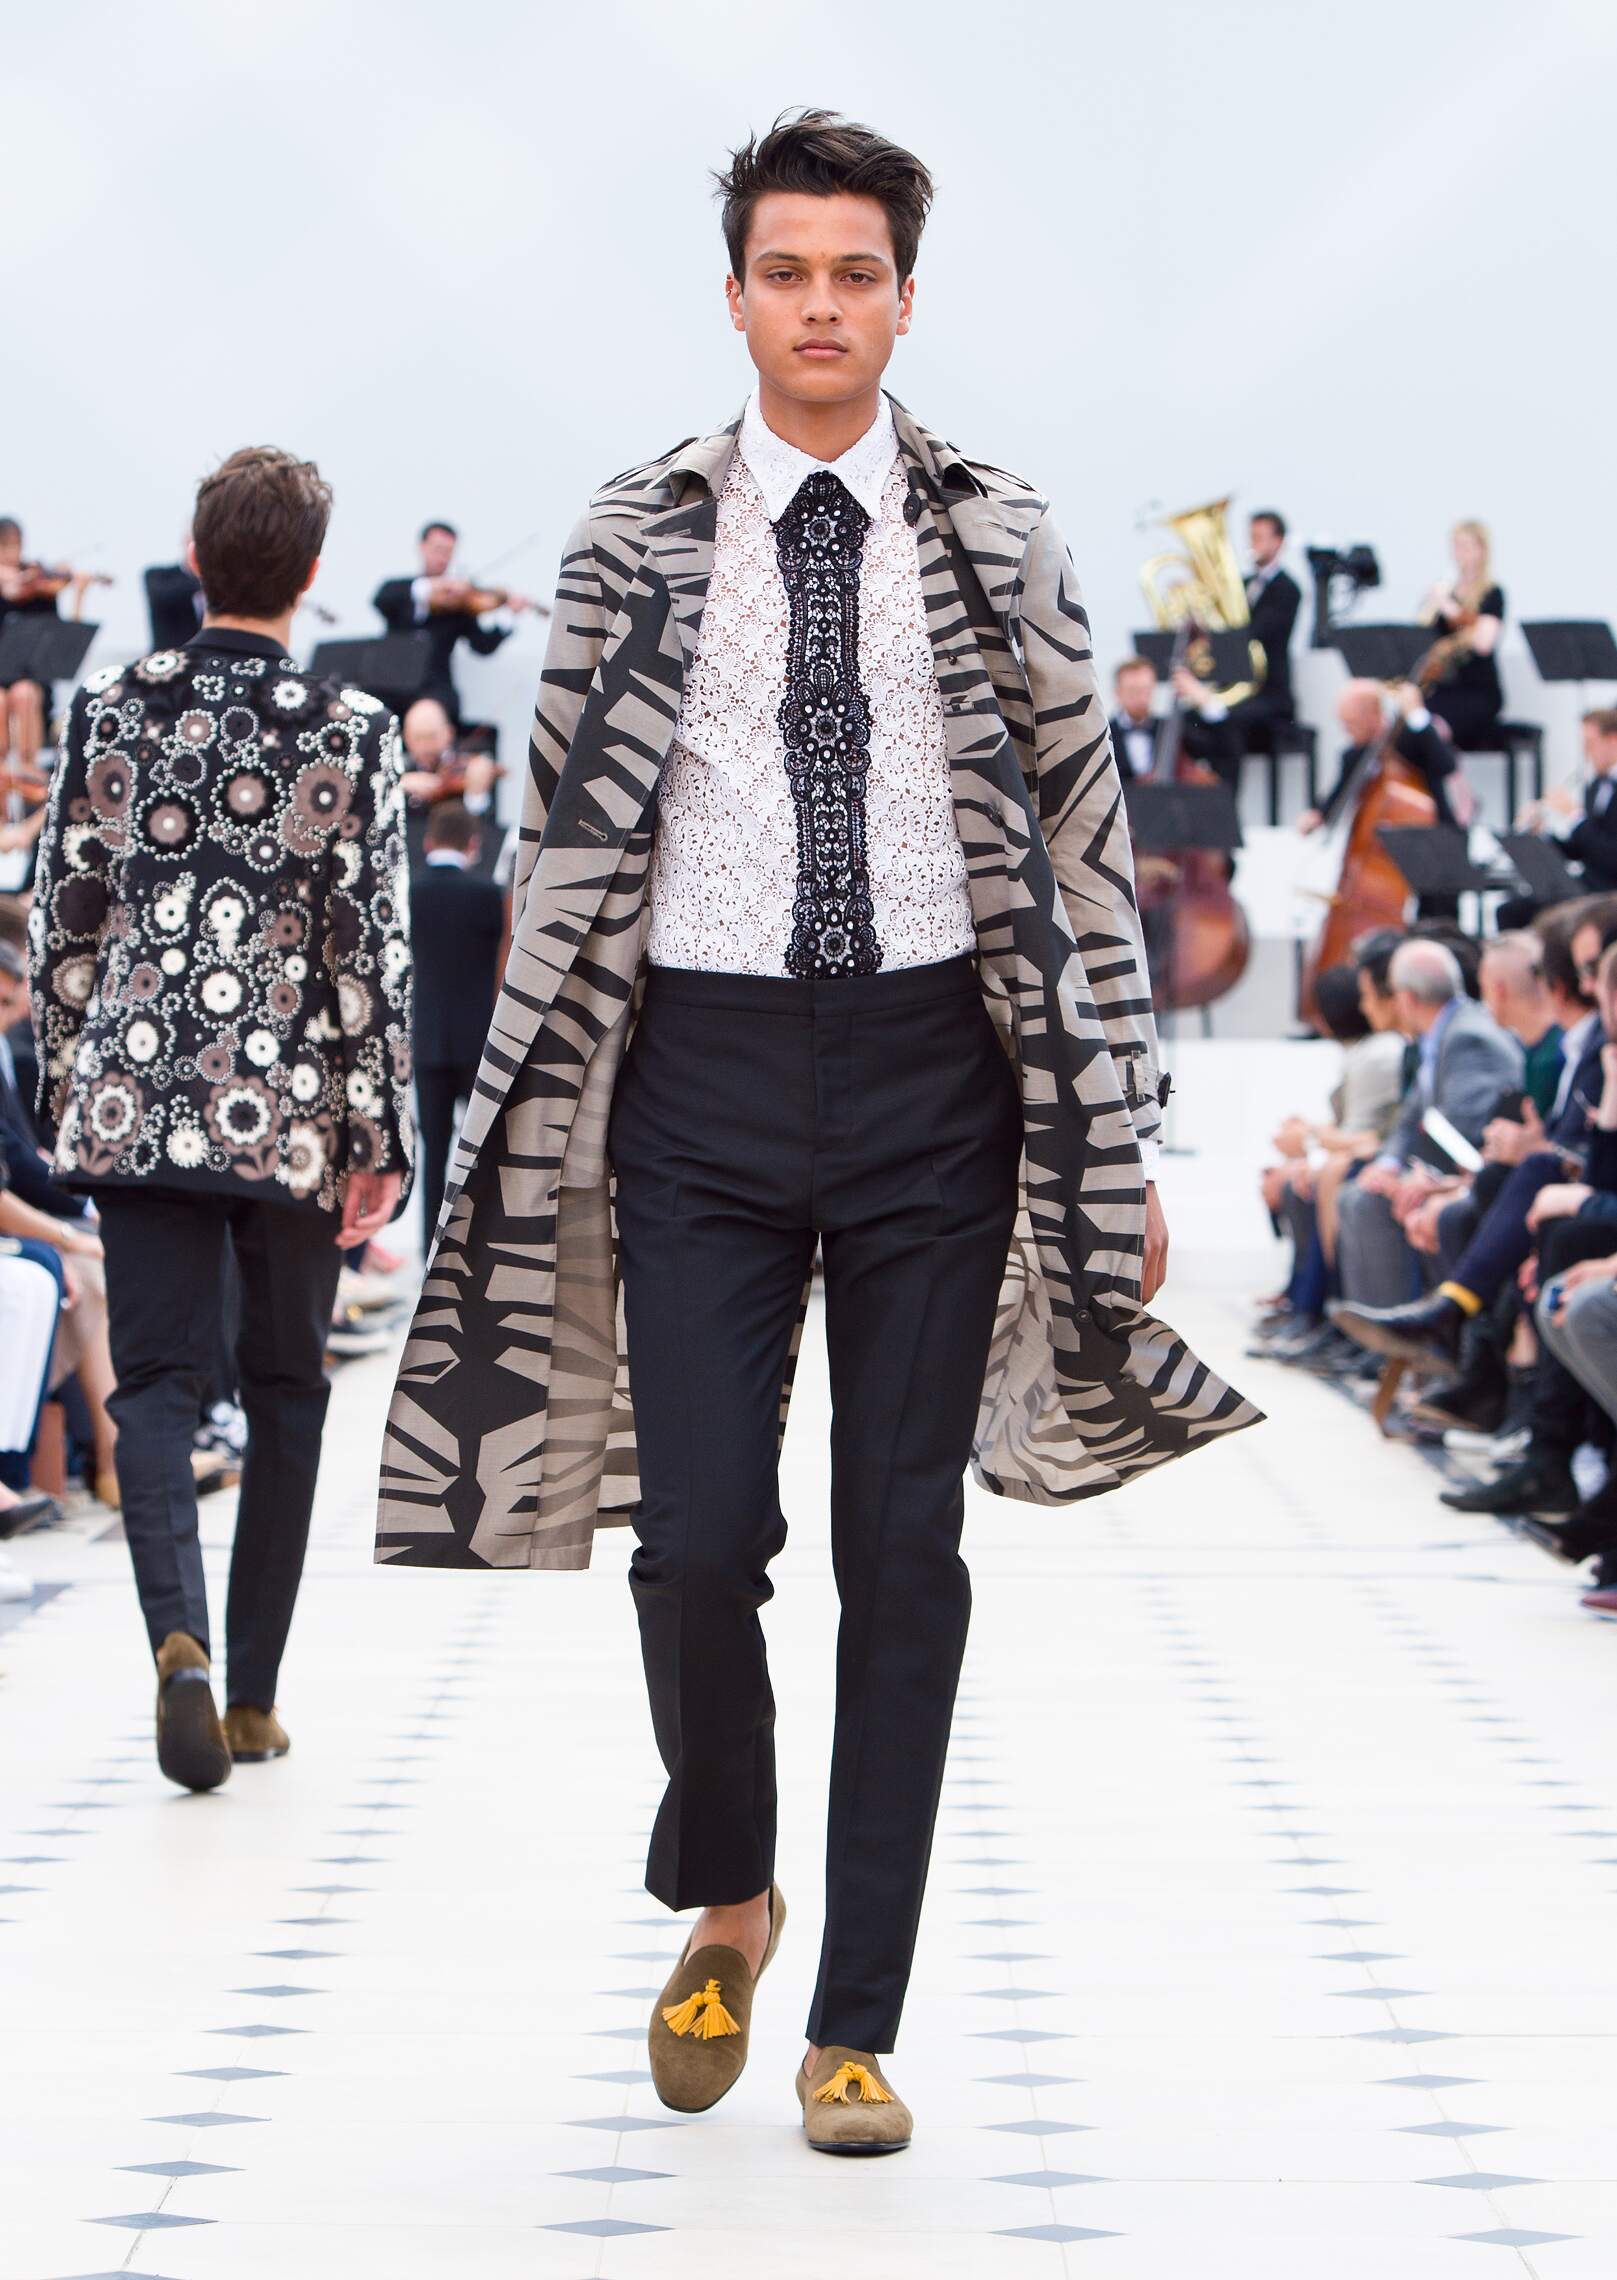 Burberry Prorsum Collection Trends Spring 2016 Catwalk